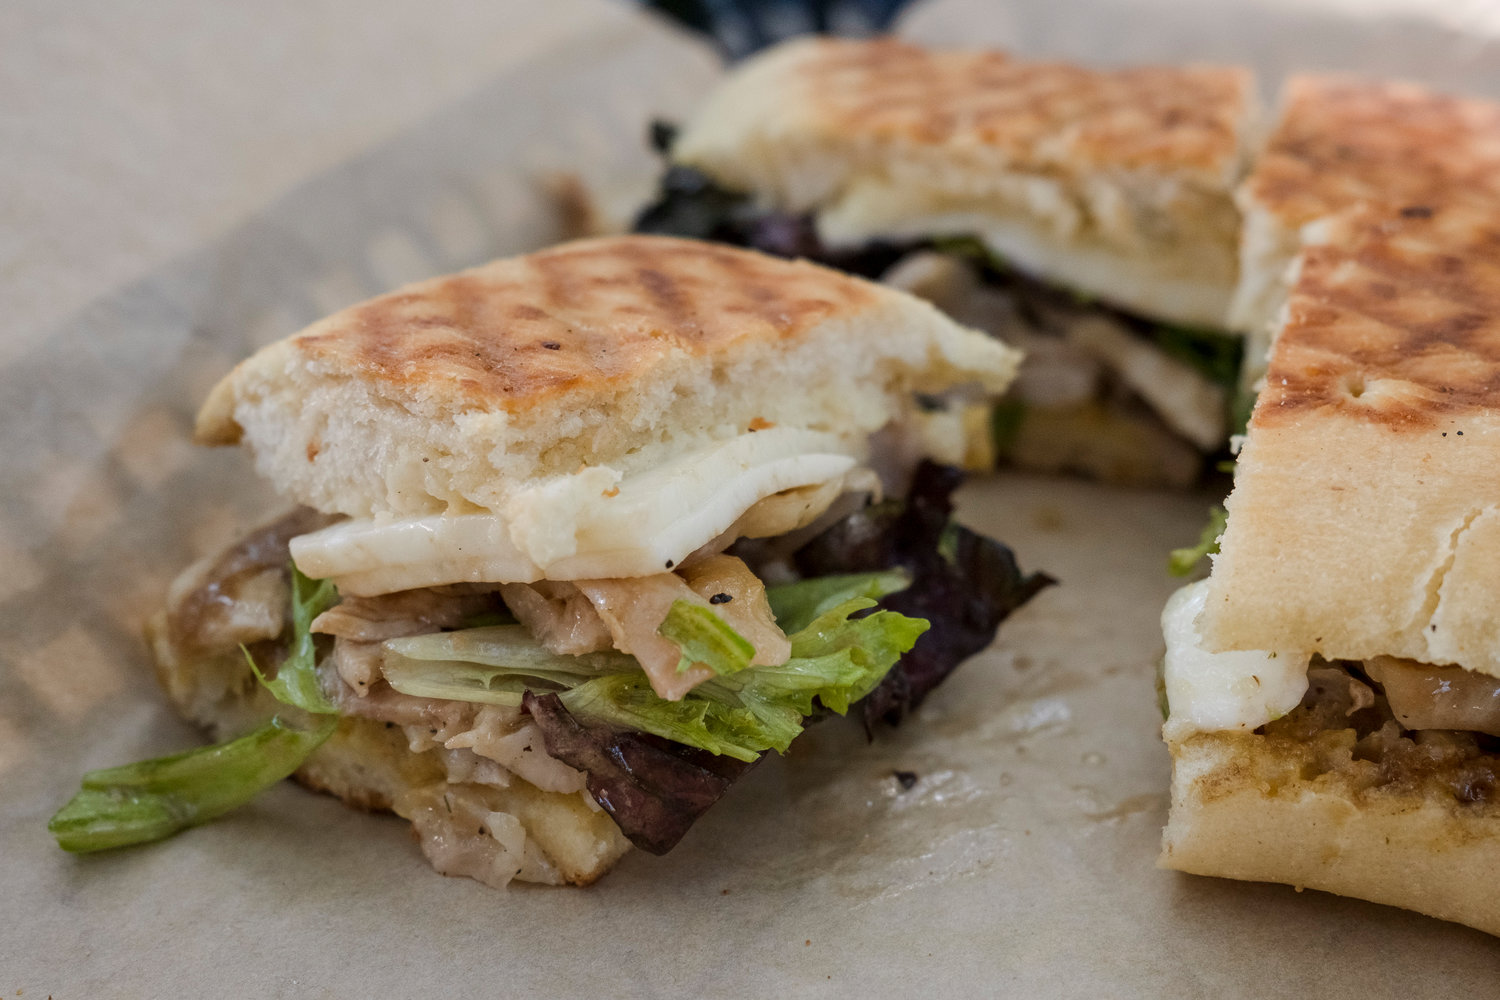 Guy Fieri proclaimed this sandwich the State Bird of Flavor Town. The House Roasted Turkey Panini sandwich has baby greens, roasted pepper, Dijon, garlic aioli and house-made mozzarella served on fresh baked focaccia.